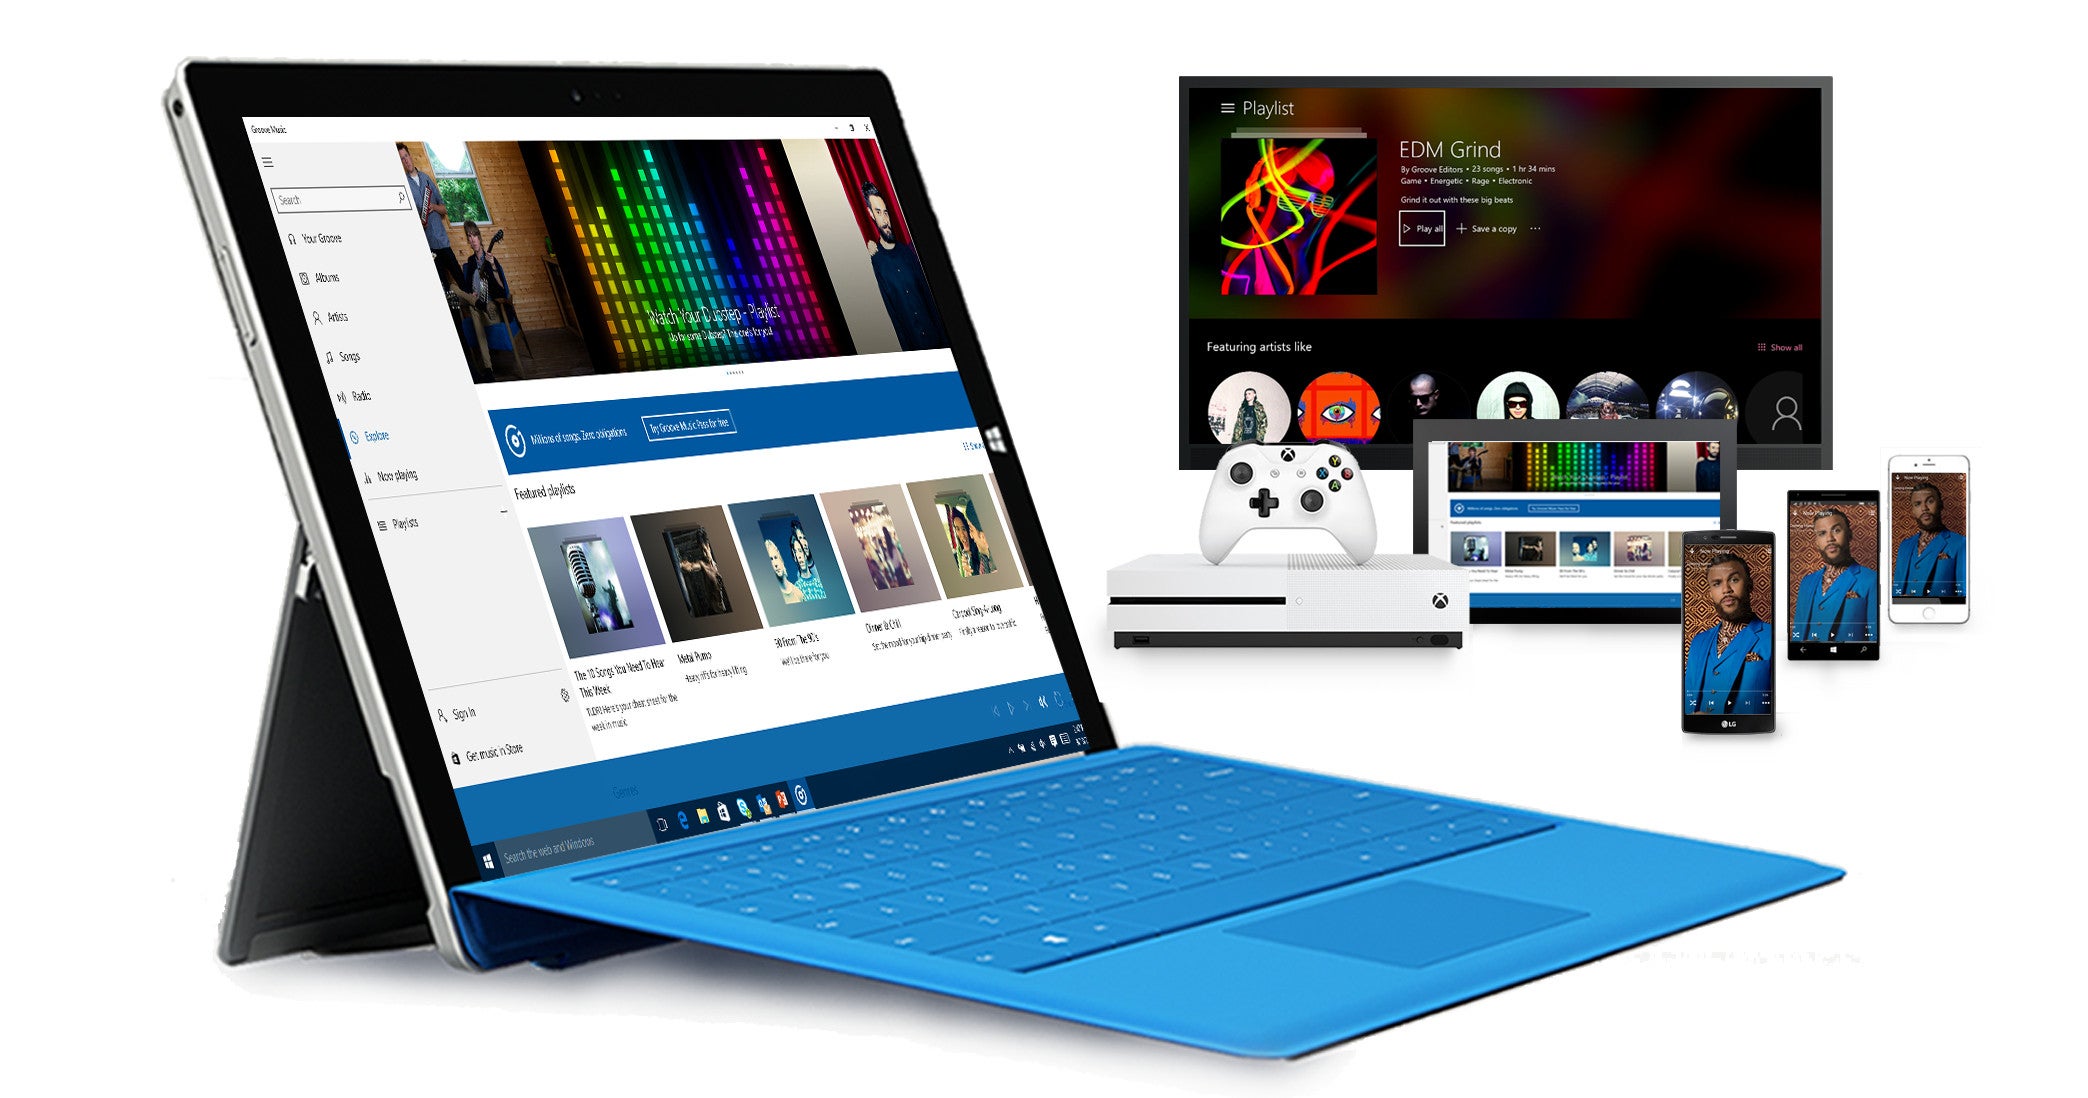 New Groove Music Pass users can get four months for free, again